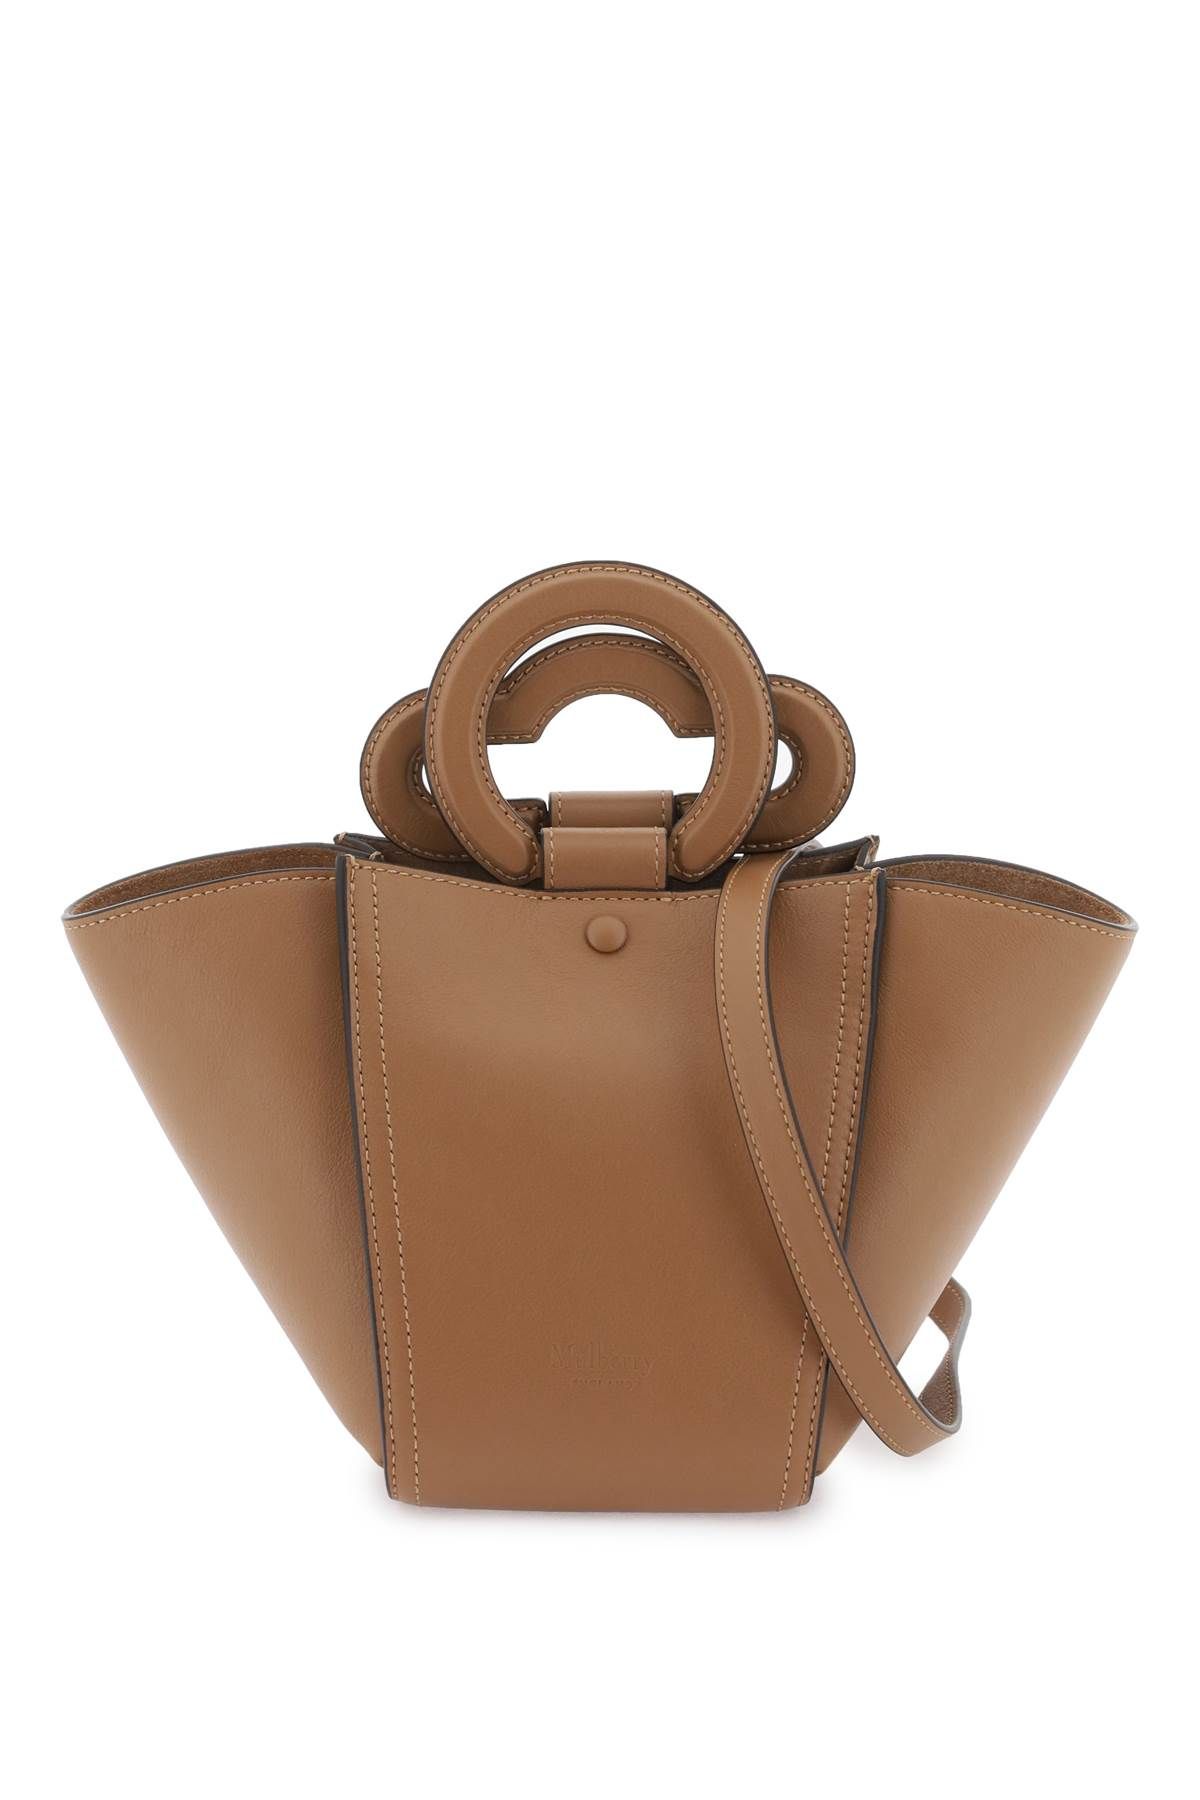 Mulberry MULBERRY 'mini rider's top handle' bag